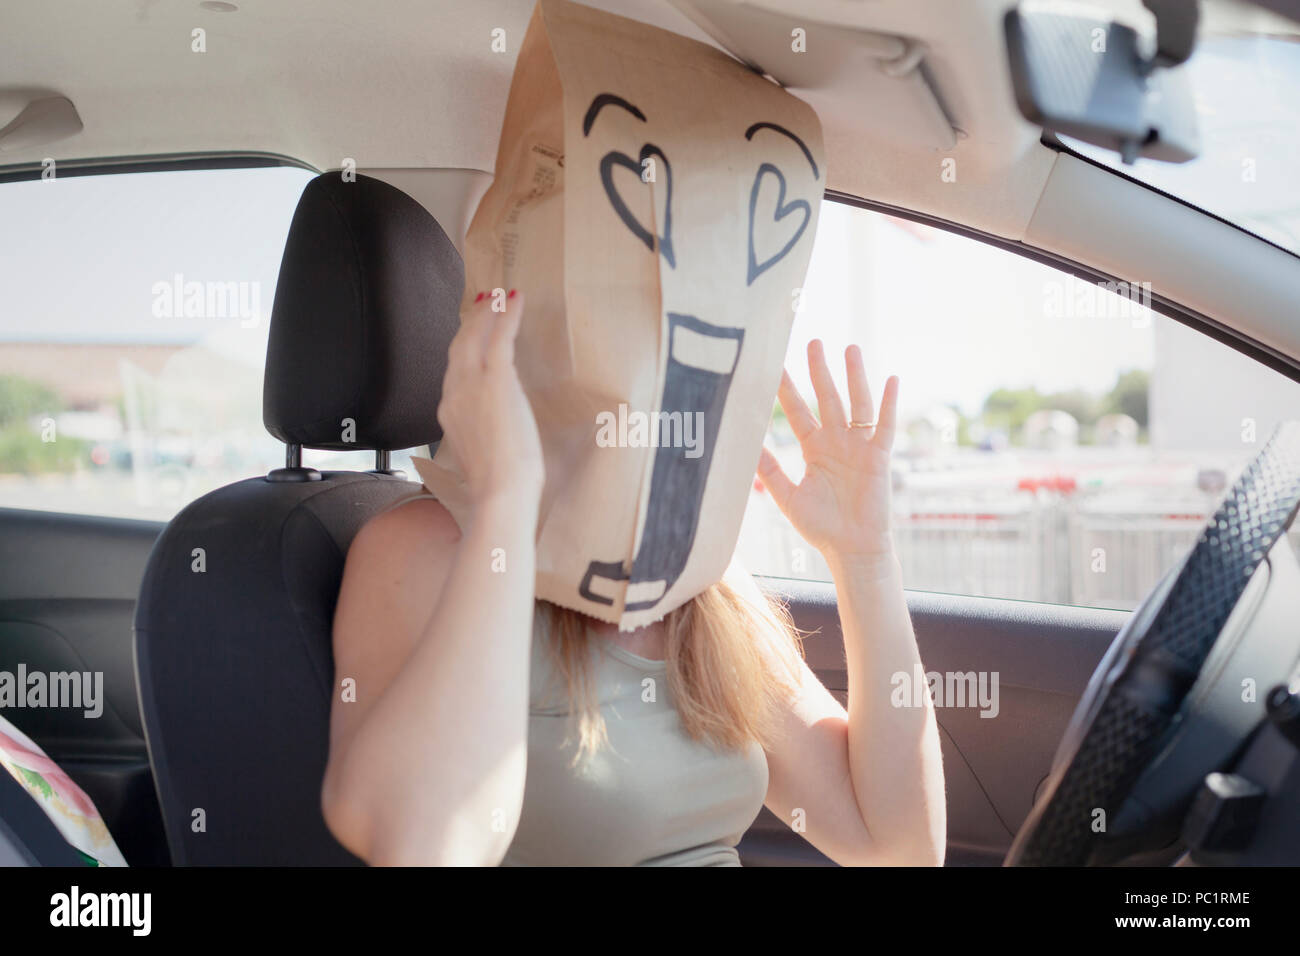 A breadbag face in a car, with a loving incredulous expression. Stock Photo